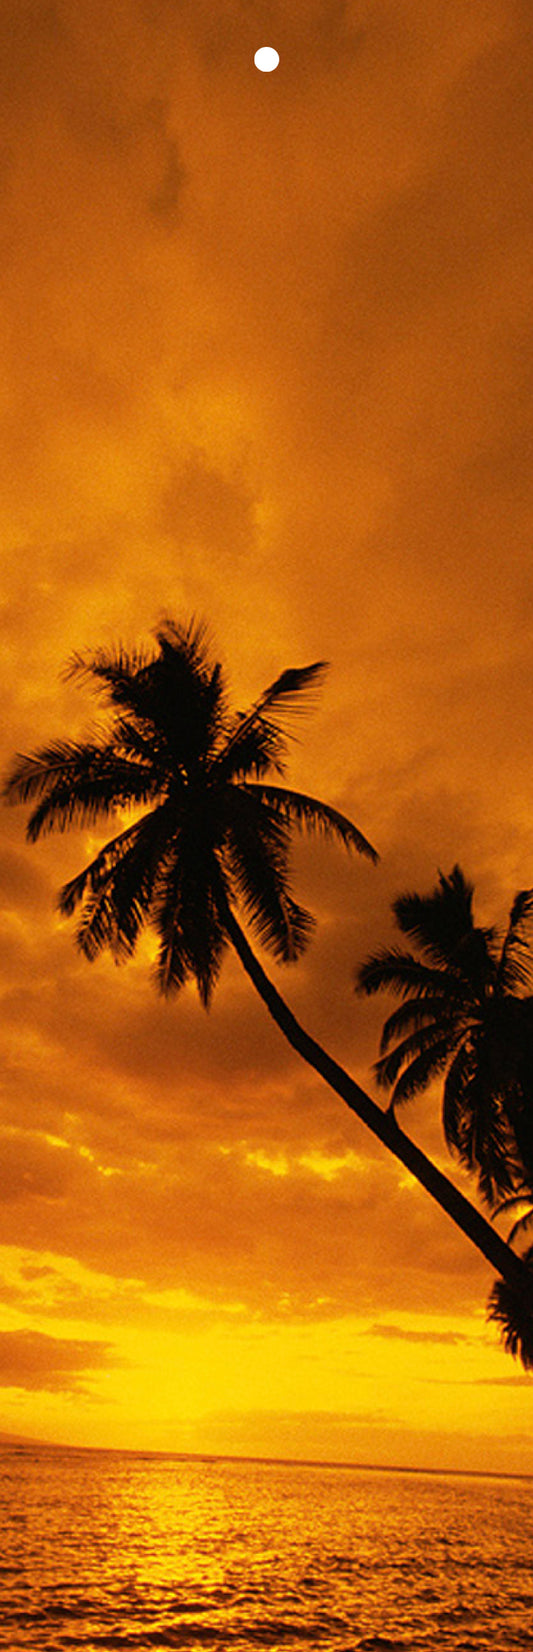 Palm Trees on a Beach at Sunset